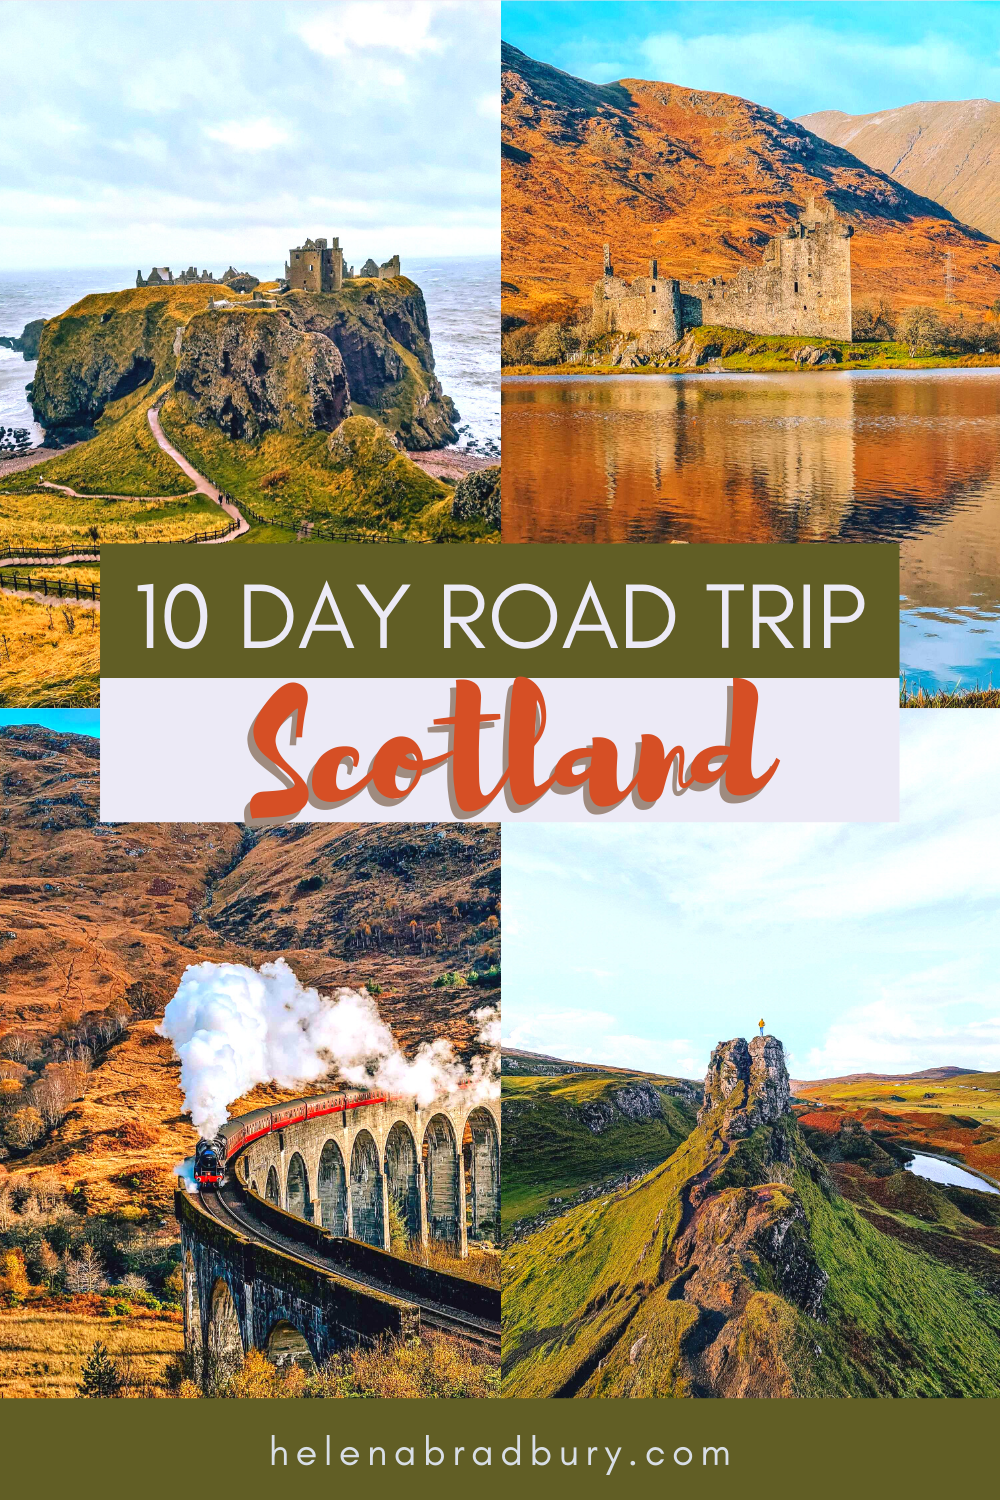 This Scotland travel guide is the ultimate Scotland road trip itinerary for 10 days